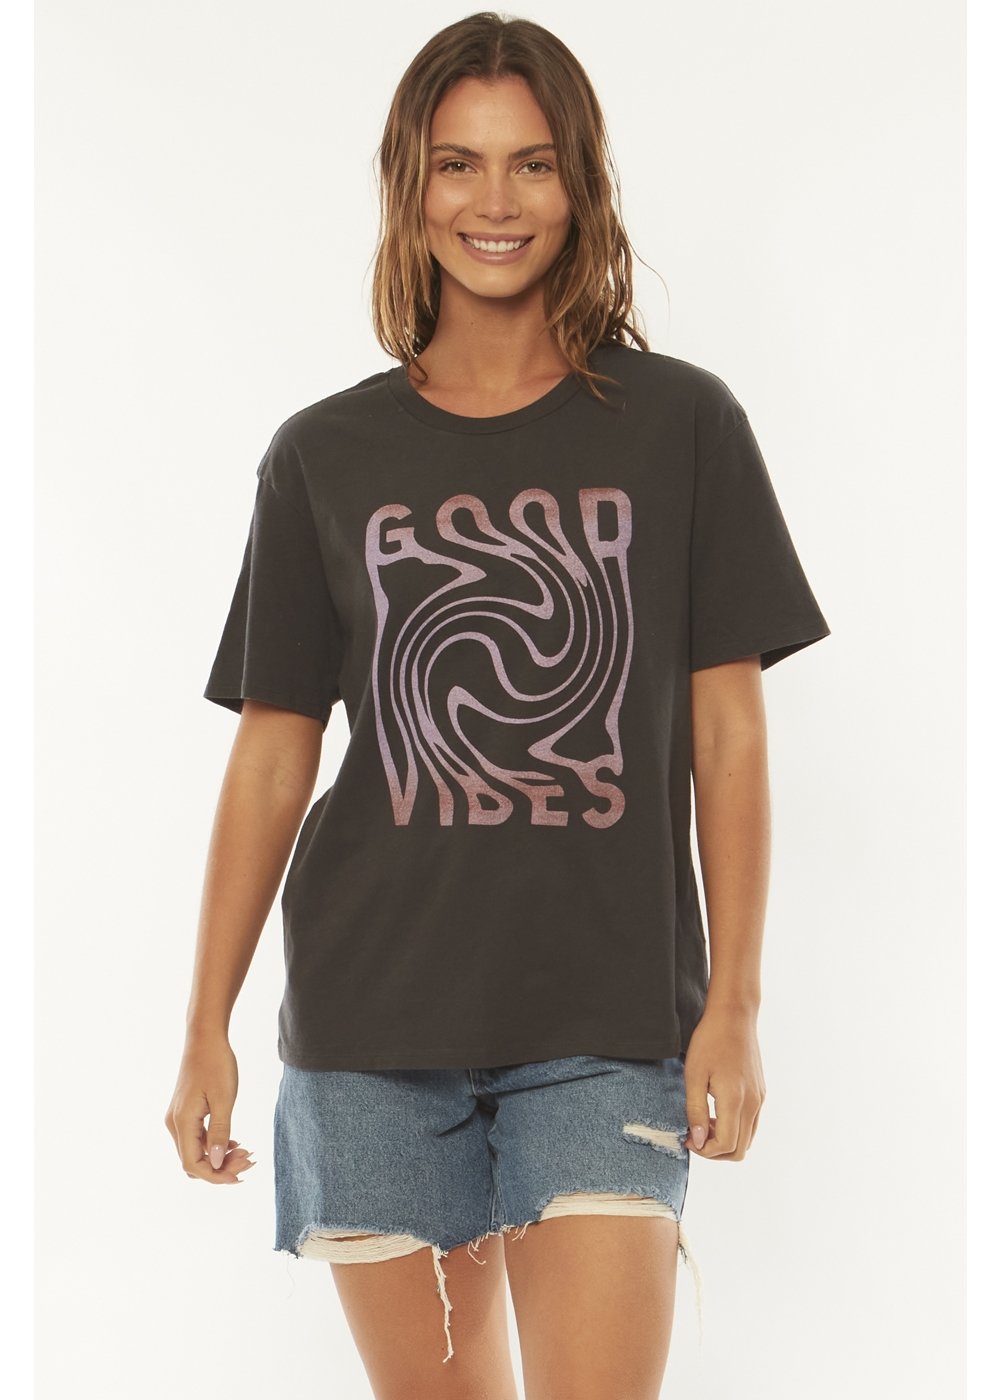 Good Vibes Short Sleeve Relaxed Tee